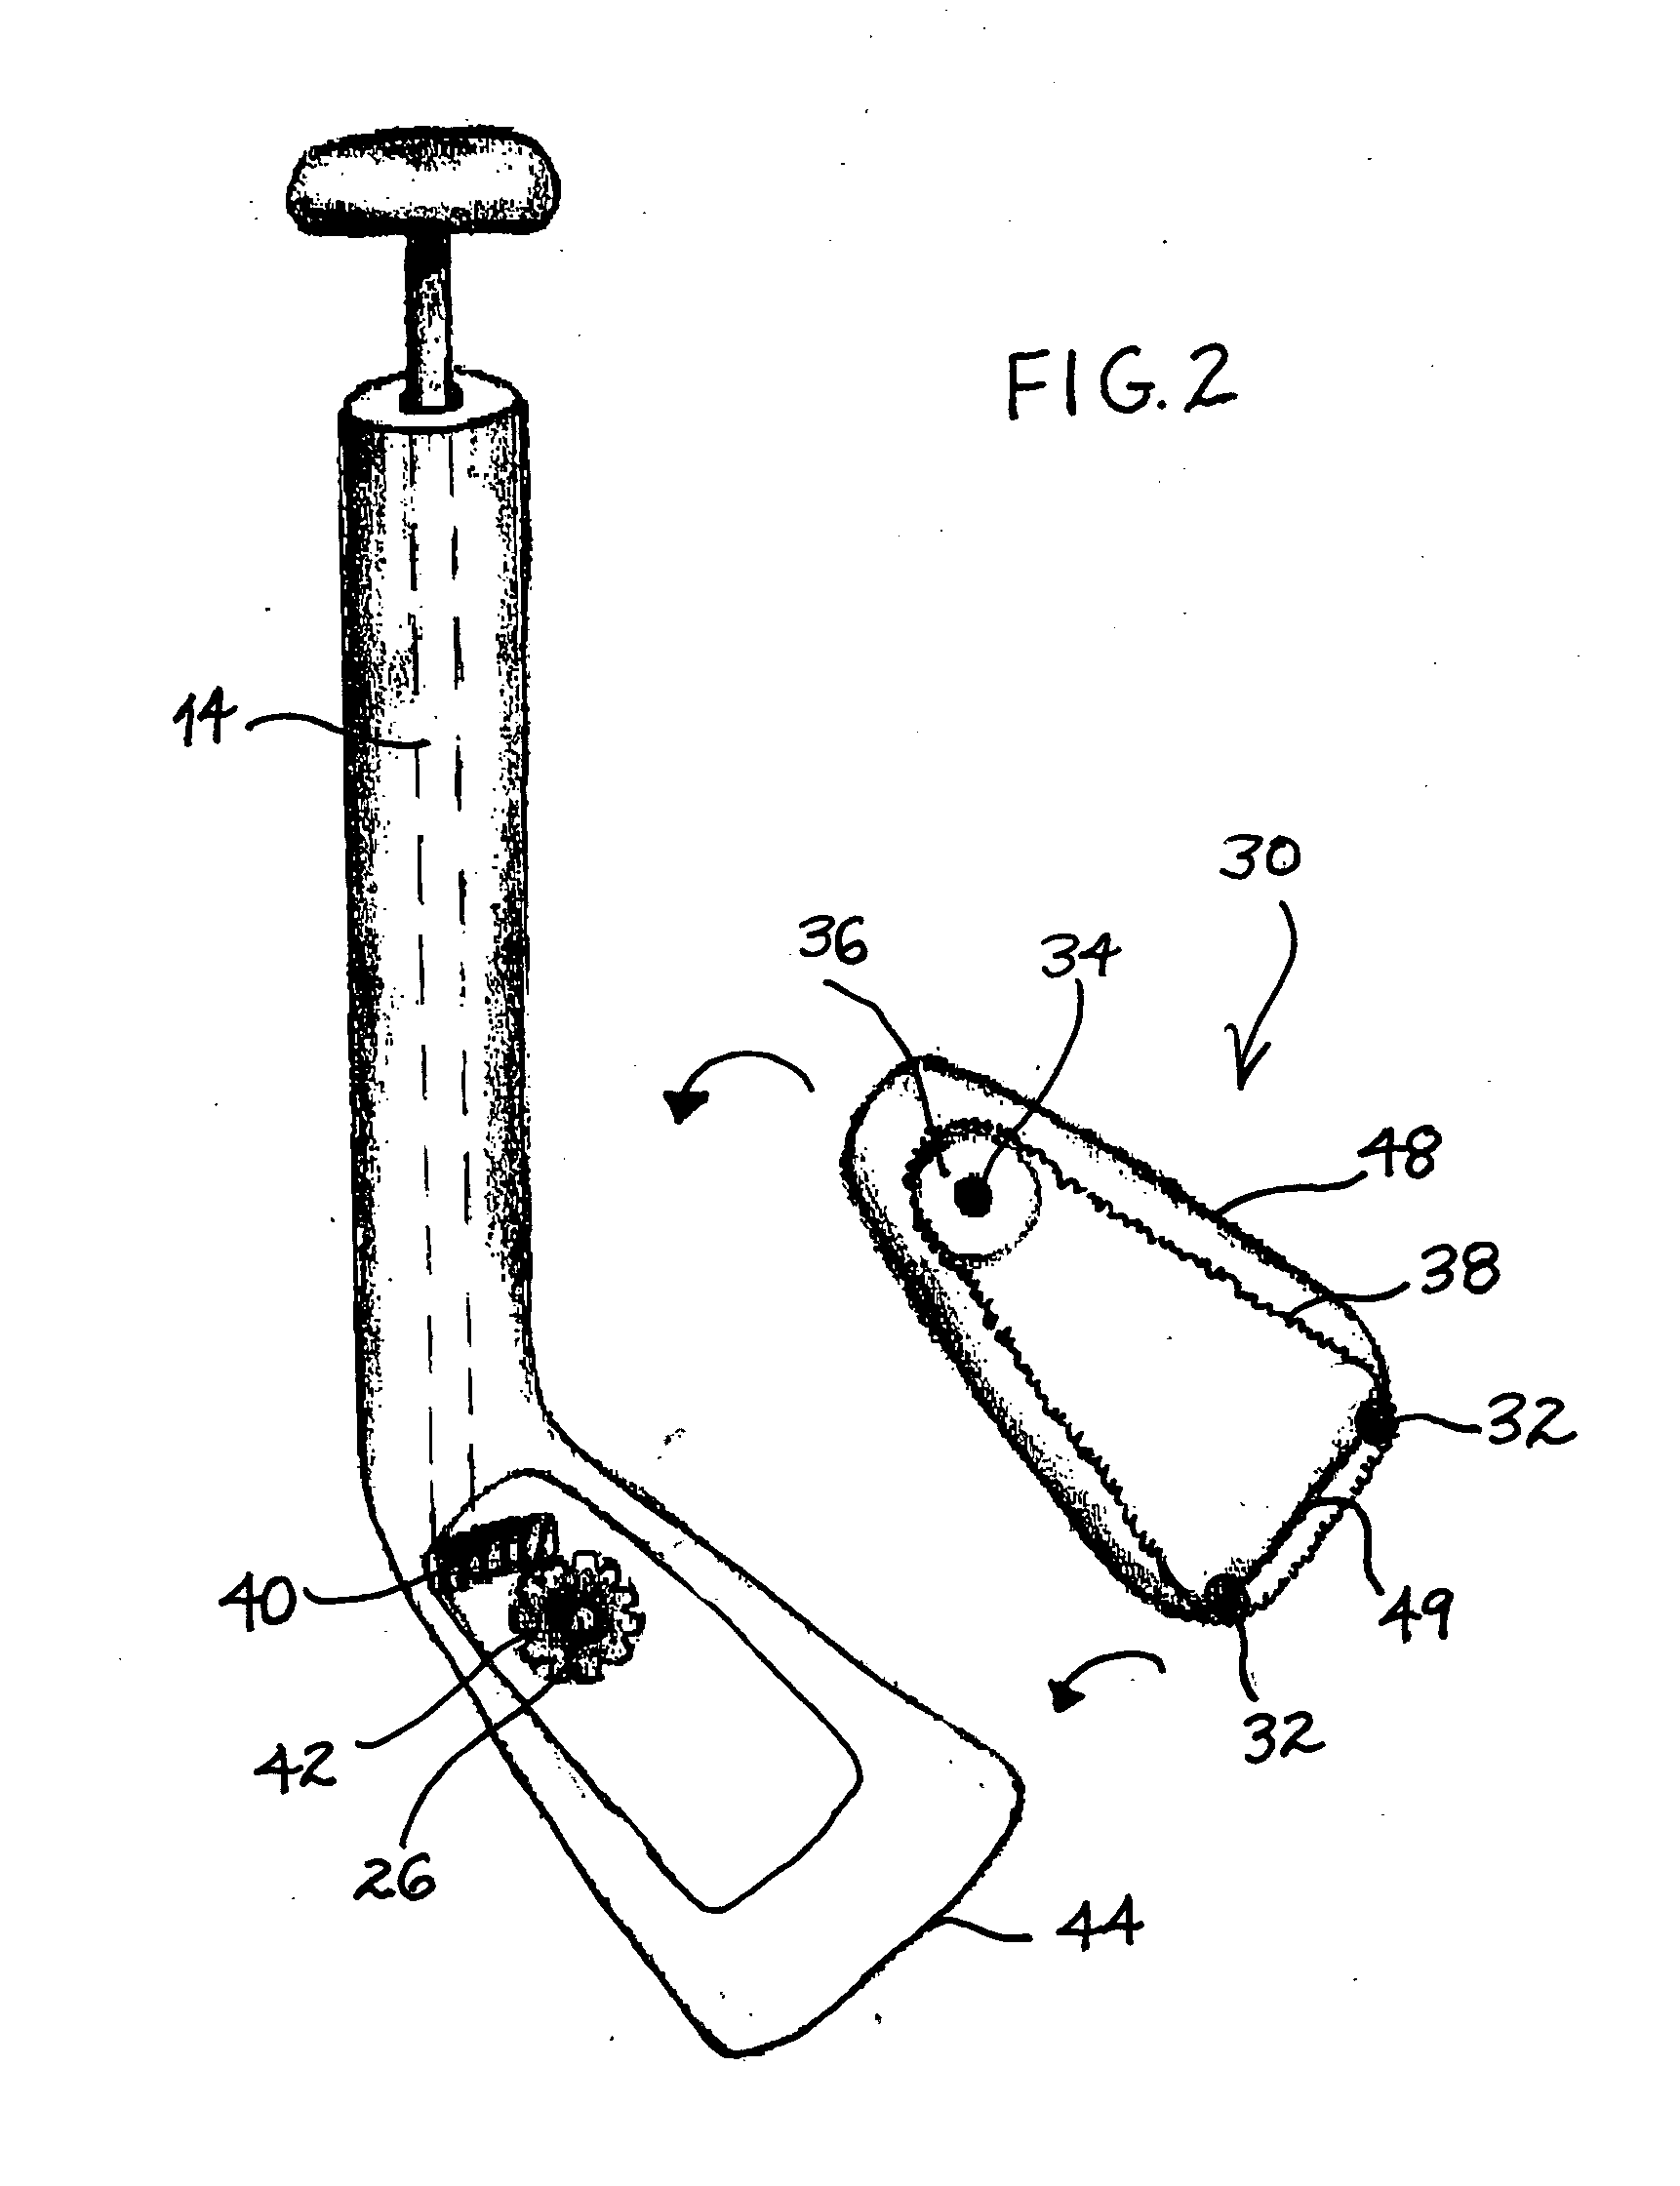 Devices for performing fusion surgery using a split thickness technique to provide vascularized autograft